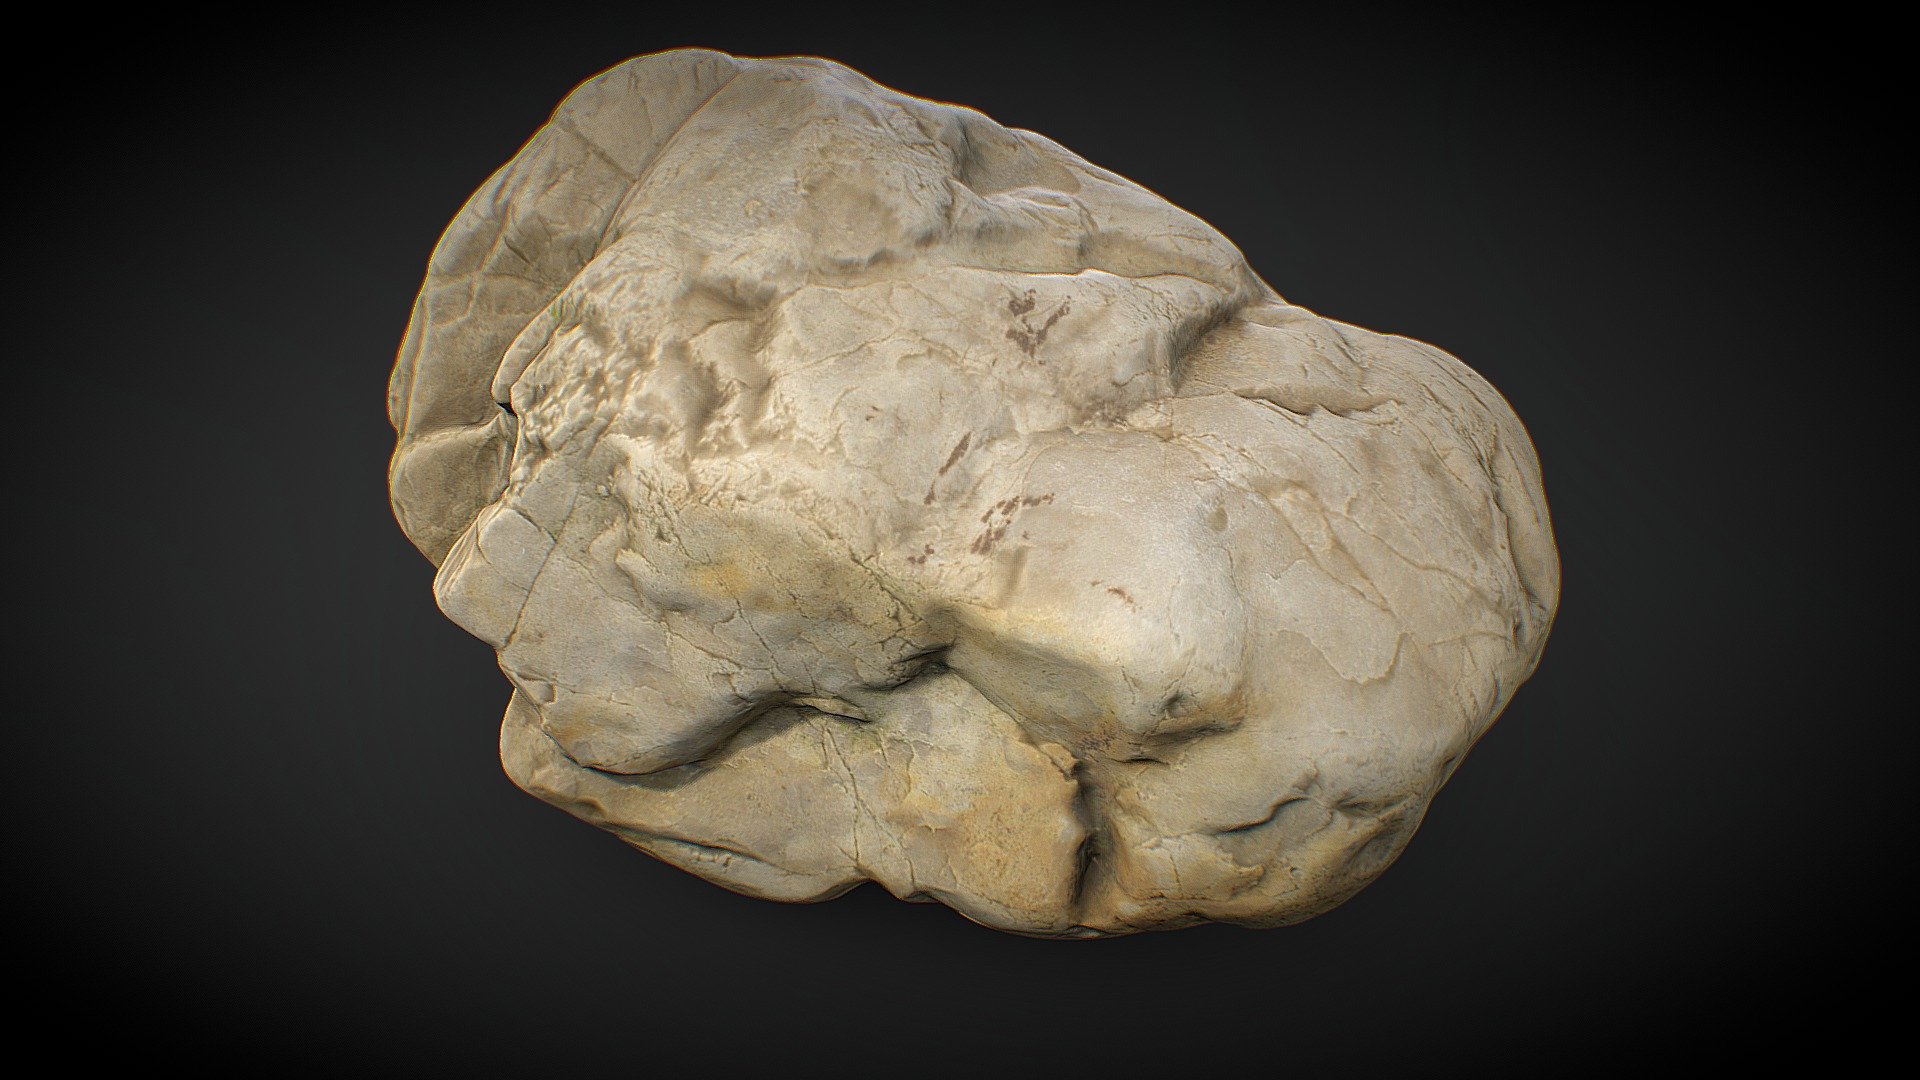 3d scan straight from agisoft.. hight resolution/poly count
btw 3.99$ is cheapest you can set to sell anything
If more people bought this (out of some support ar least) I can put up more free rock scans - rock - Buy Royalty Free 3D model by Robob3ar (@robobear) 3d model